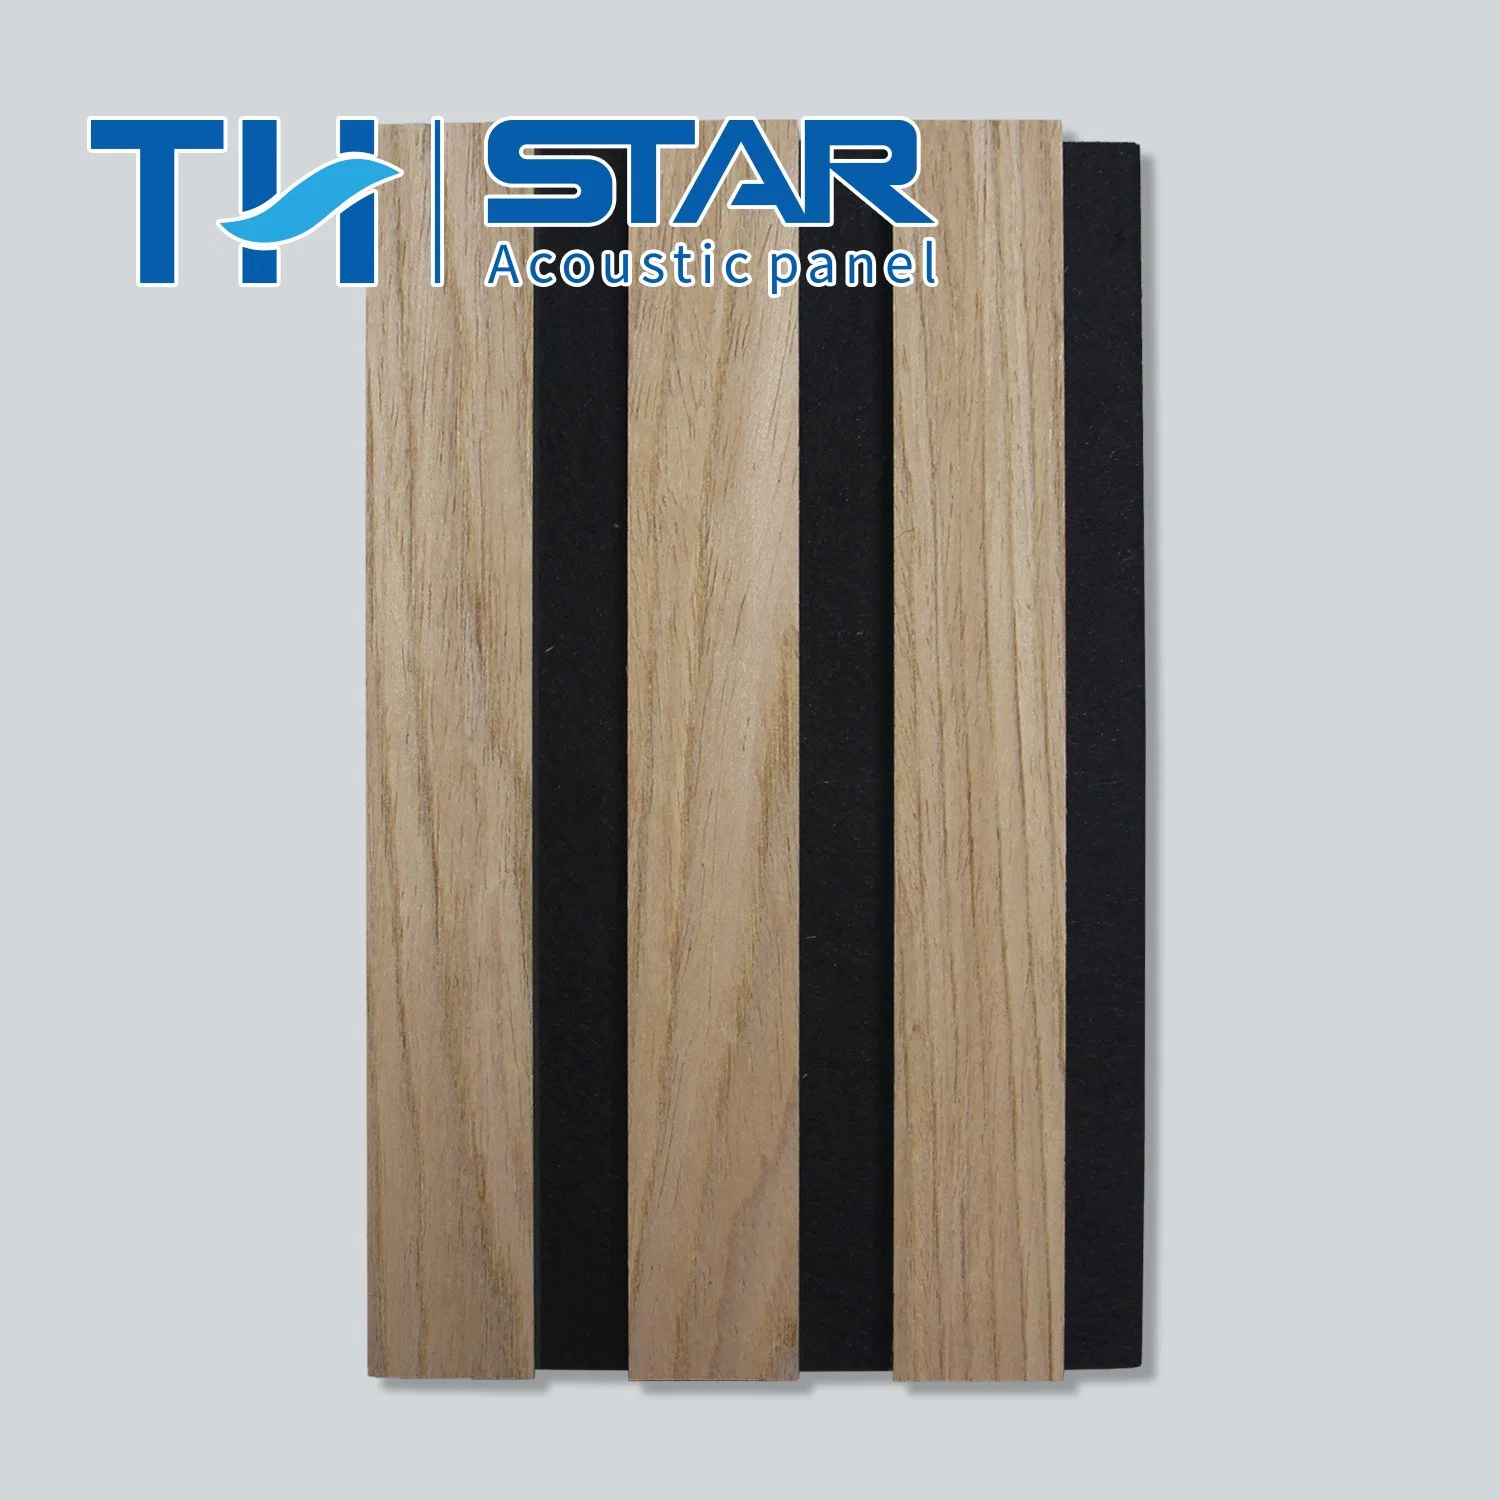 Acoustic Panel Wooden Panels Sound Proof Wall Polyester Acoustic Slat Wood Wall Panels Soundproof Fireproof